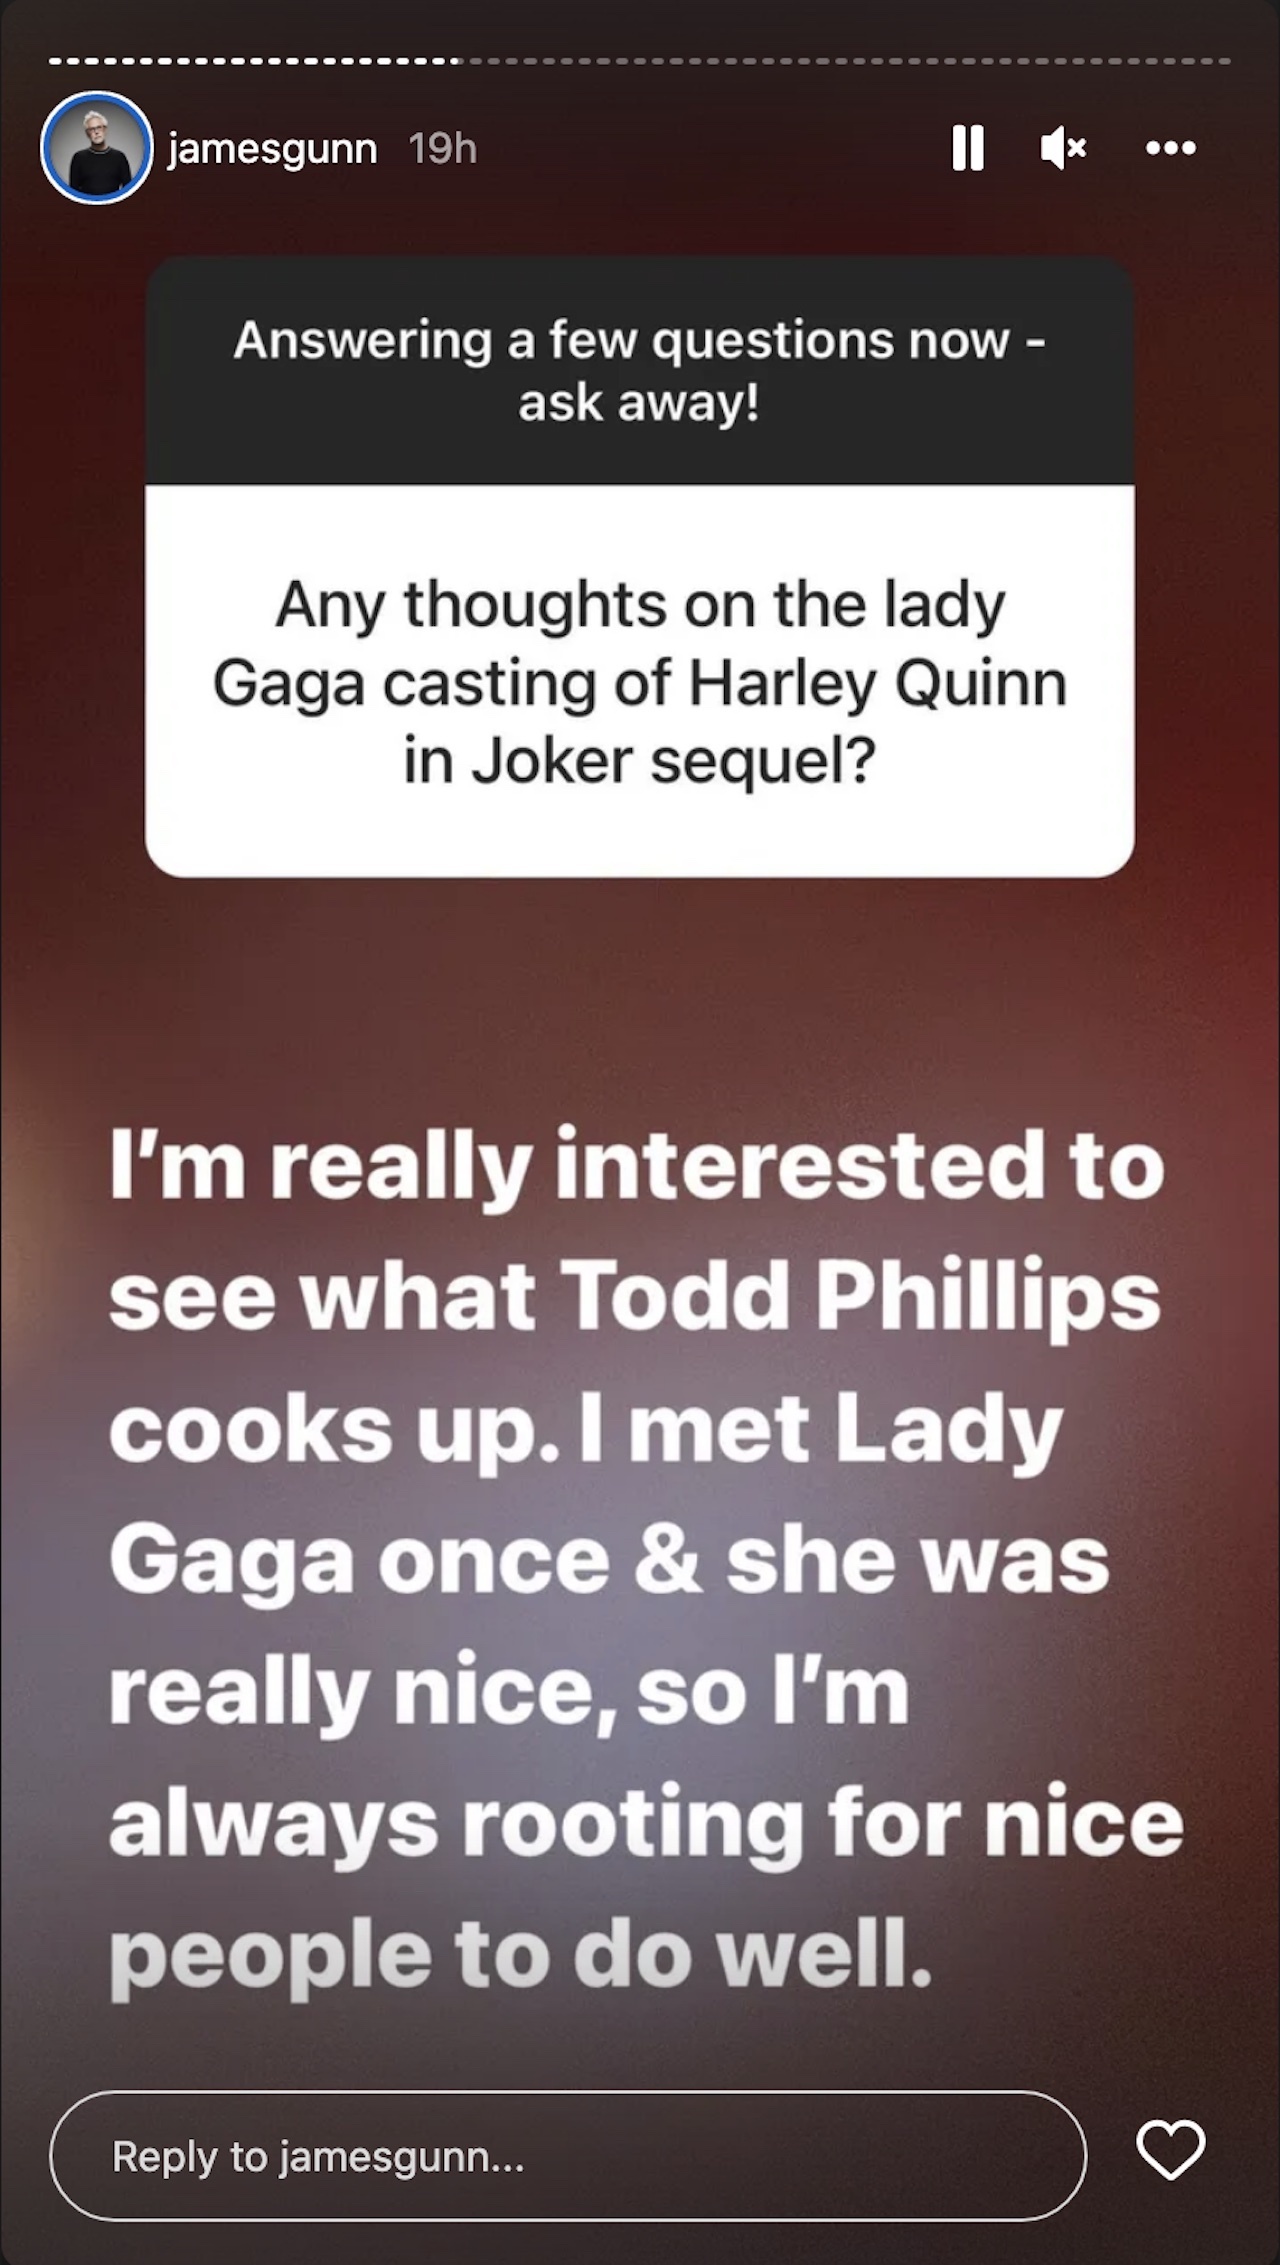 James Gunn's Instagram story about Lady Gaga playing Harley Quinn in the Joker sequel